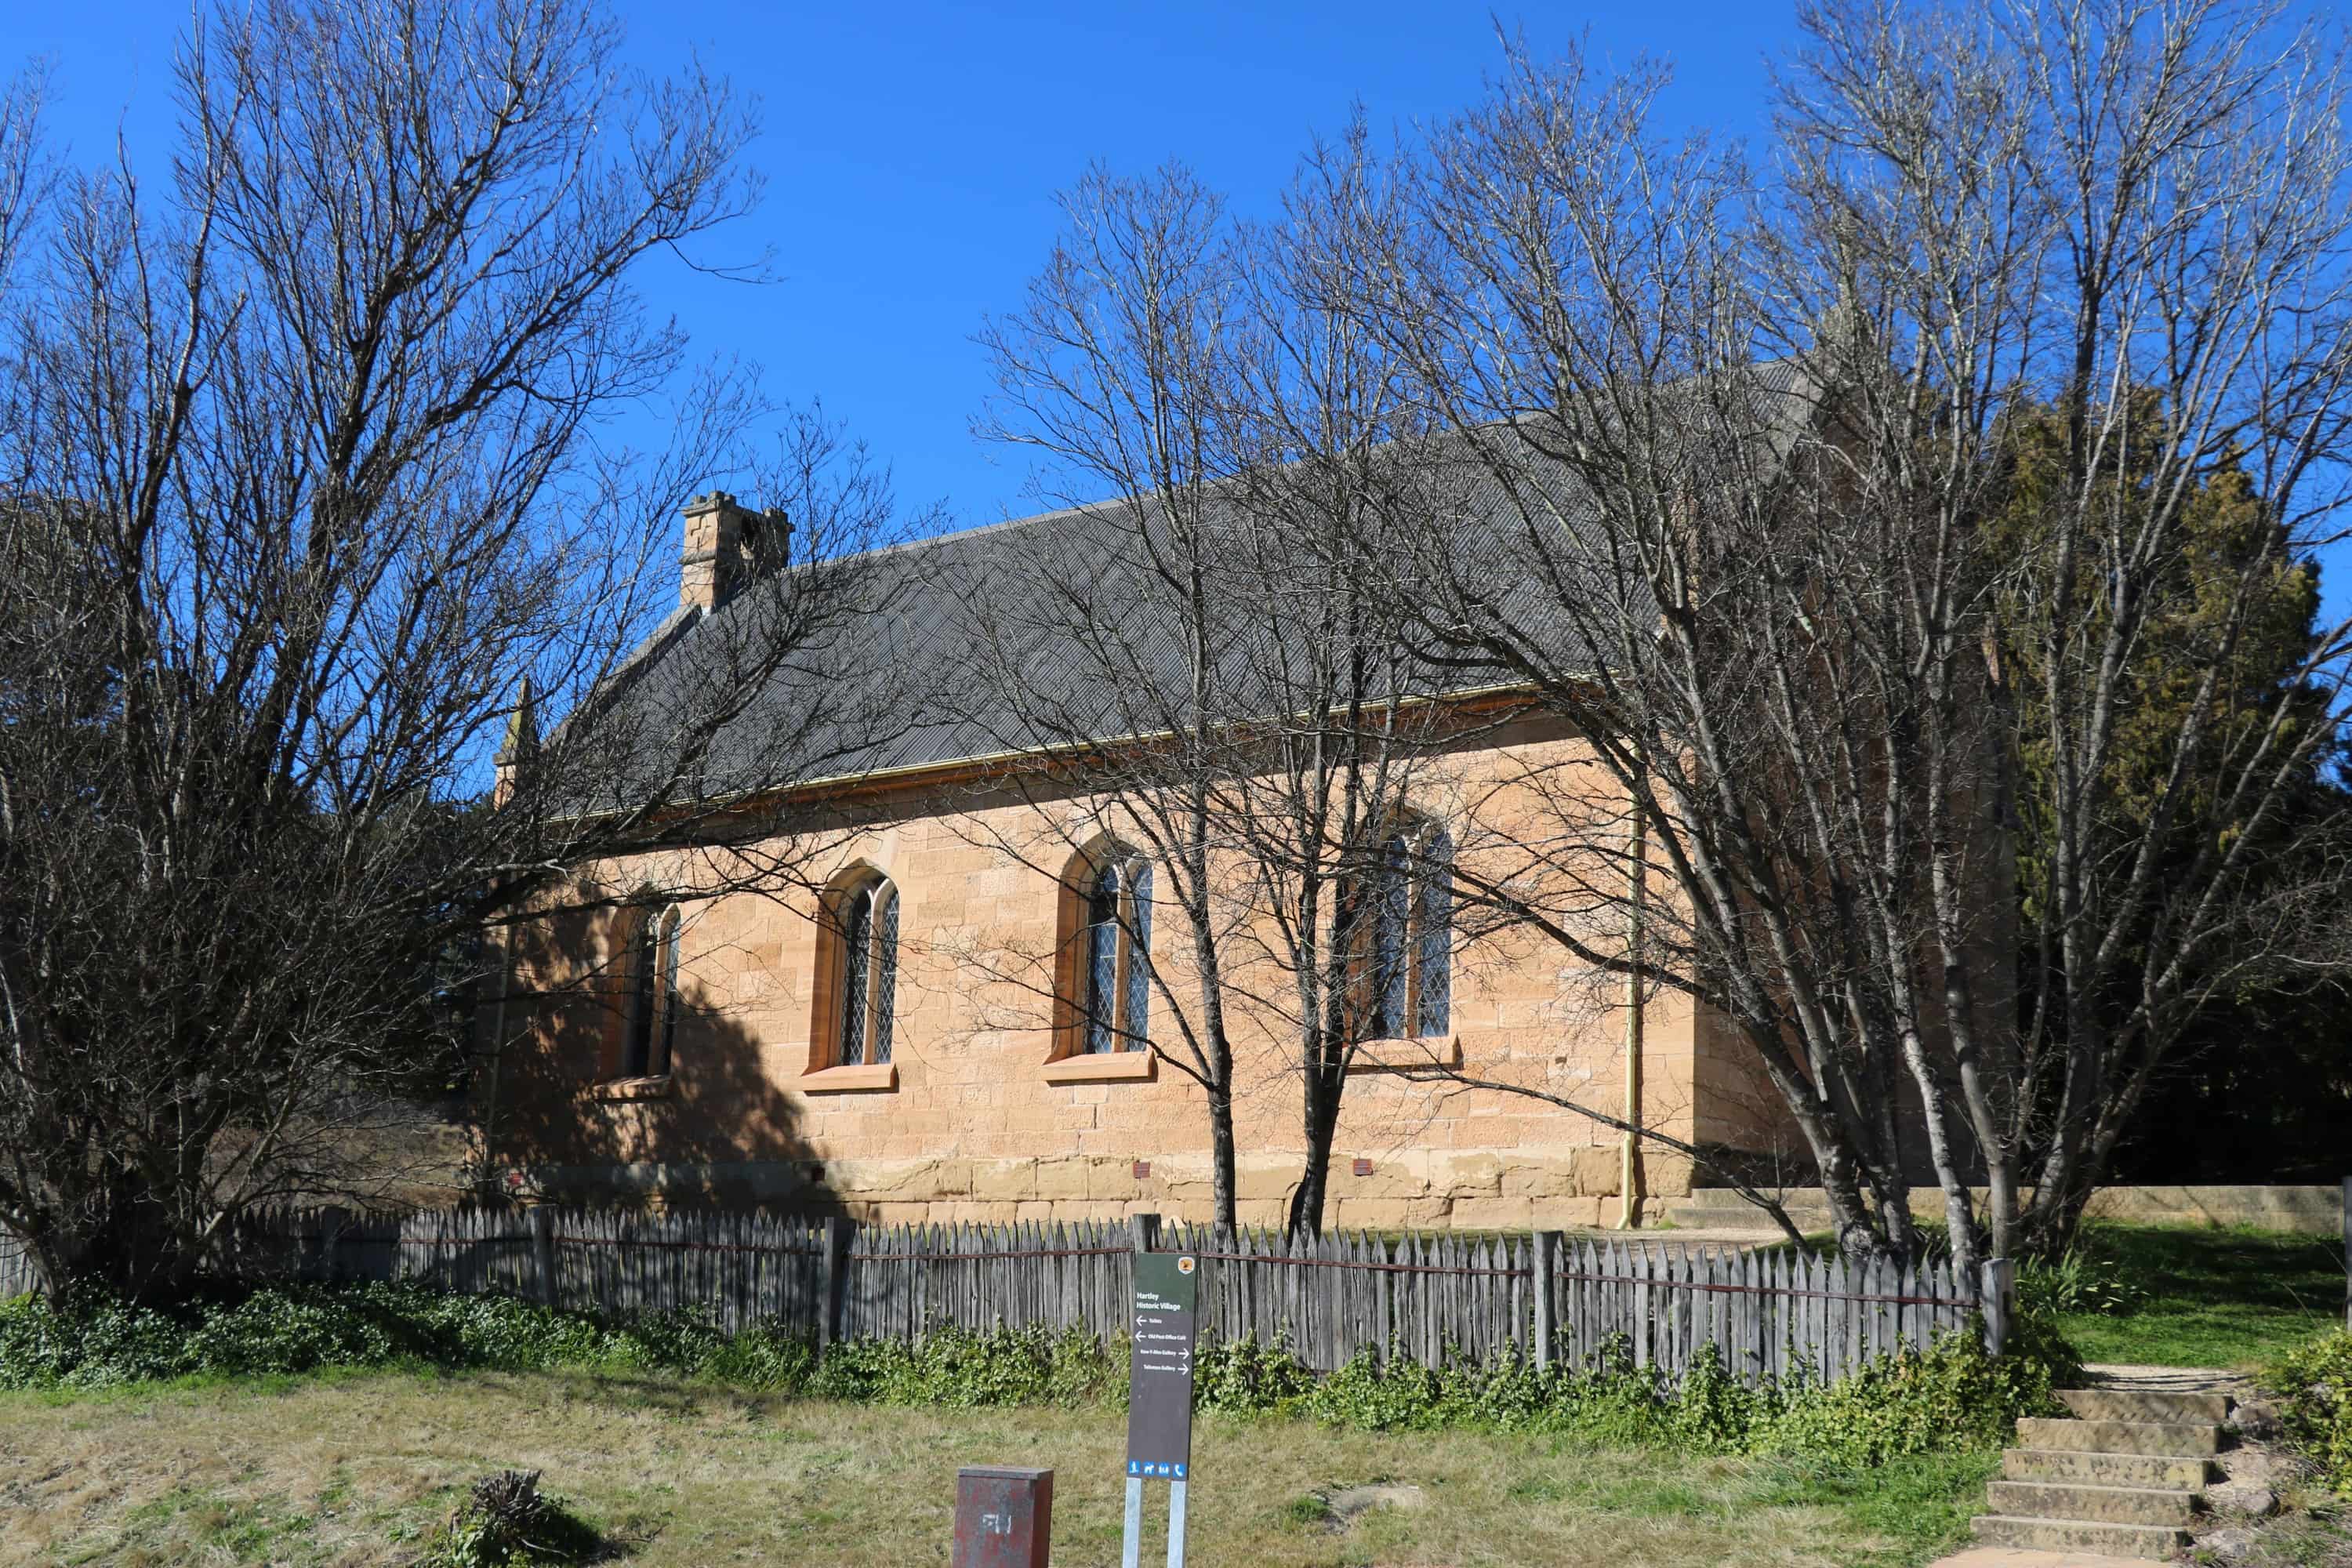 A sandstone building that forms part of the historic Hartley village with a backdrop of blue sky